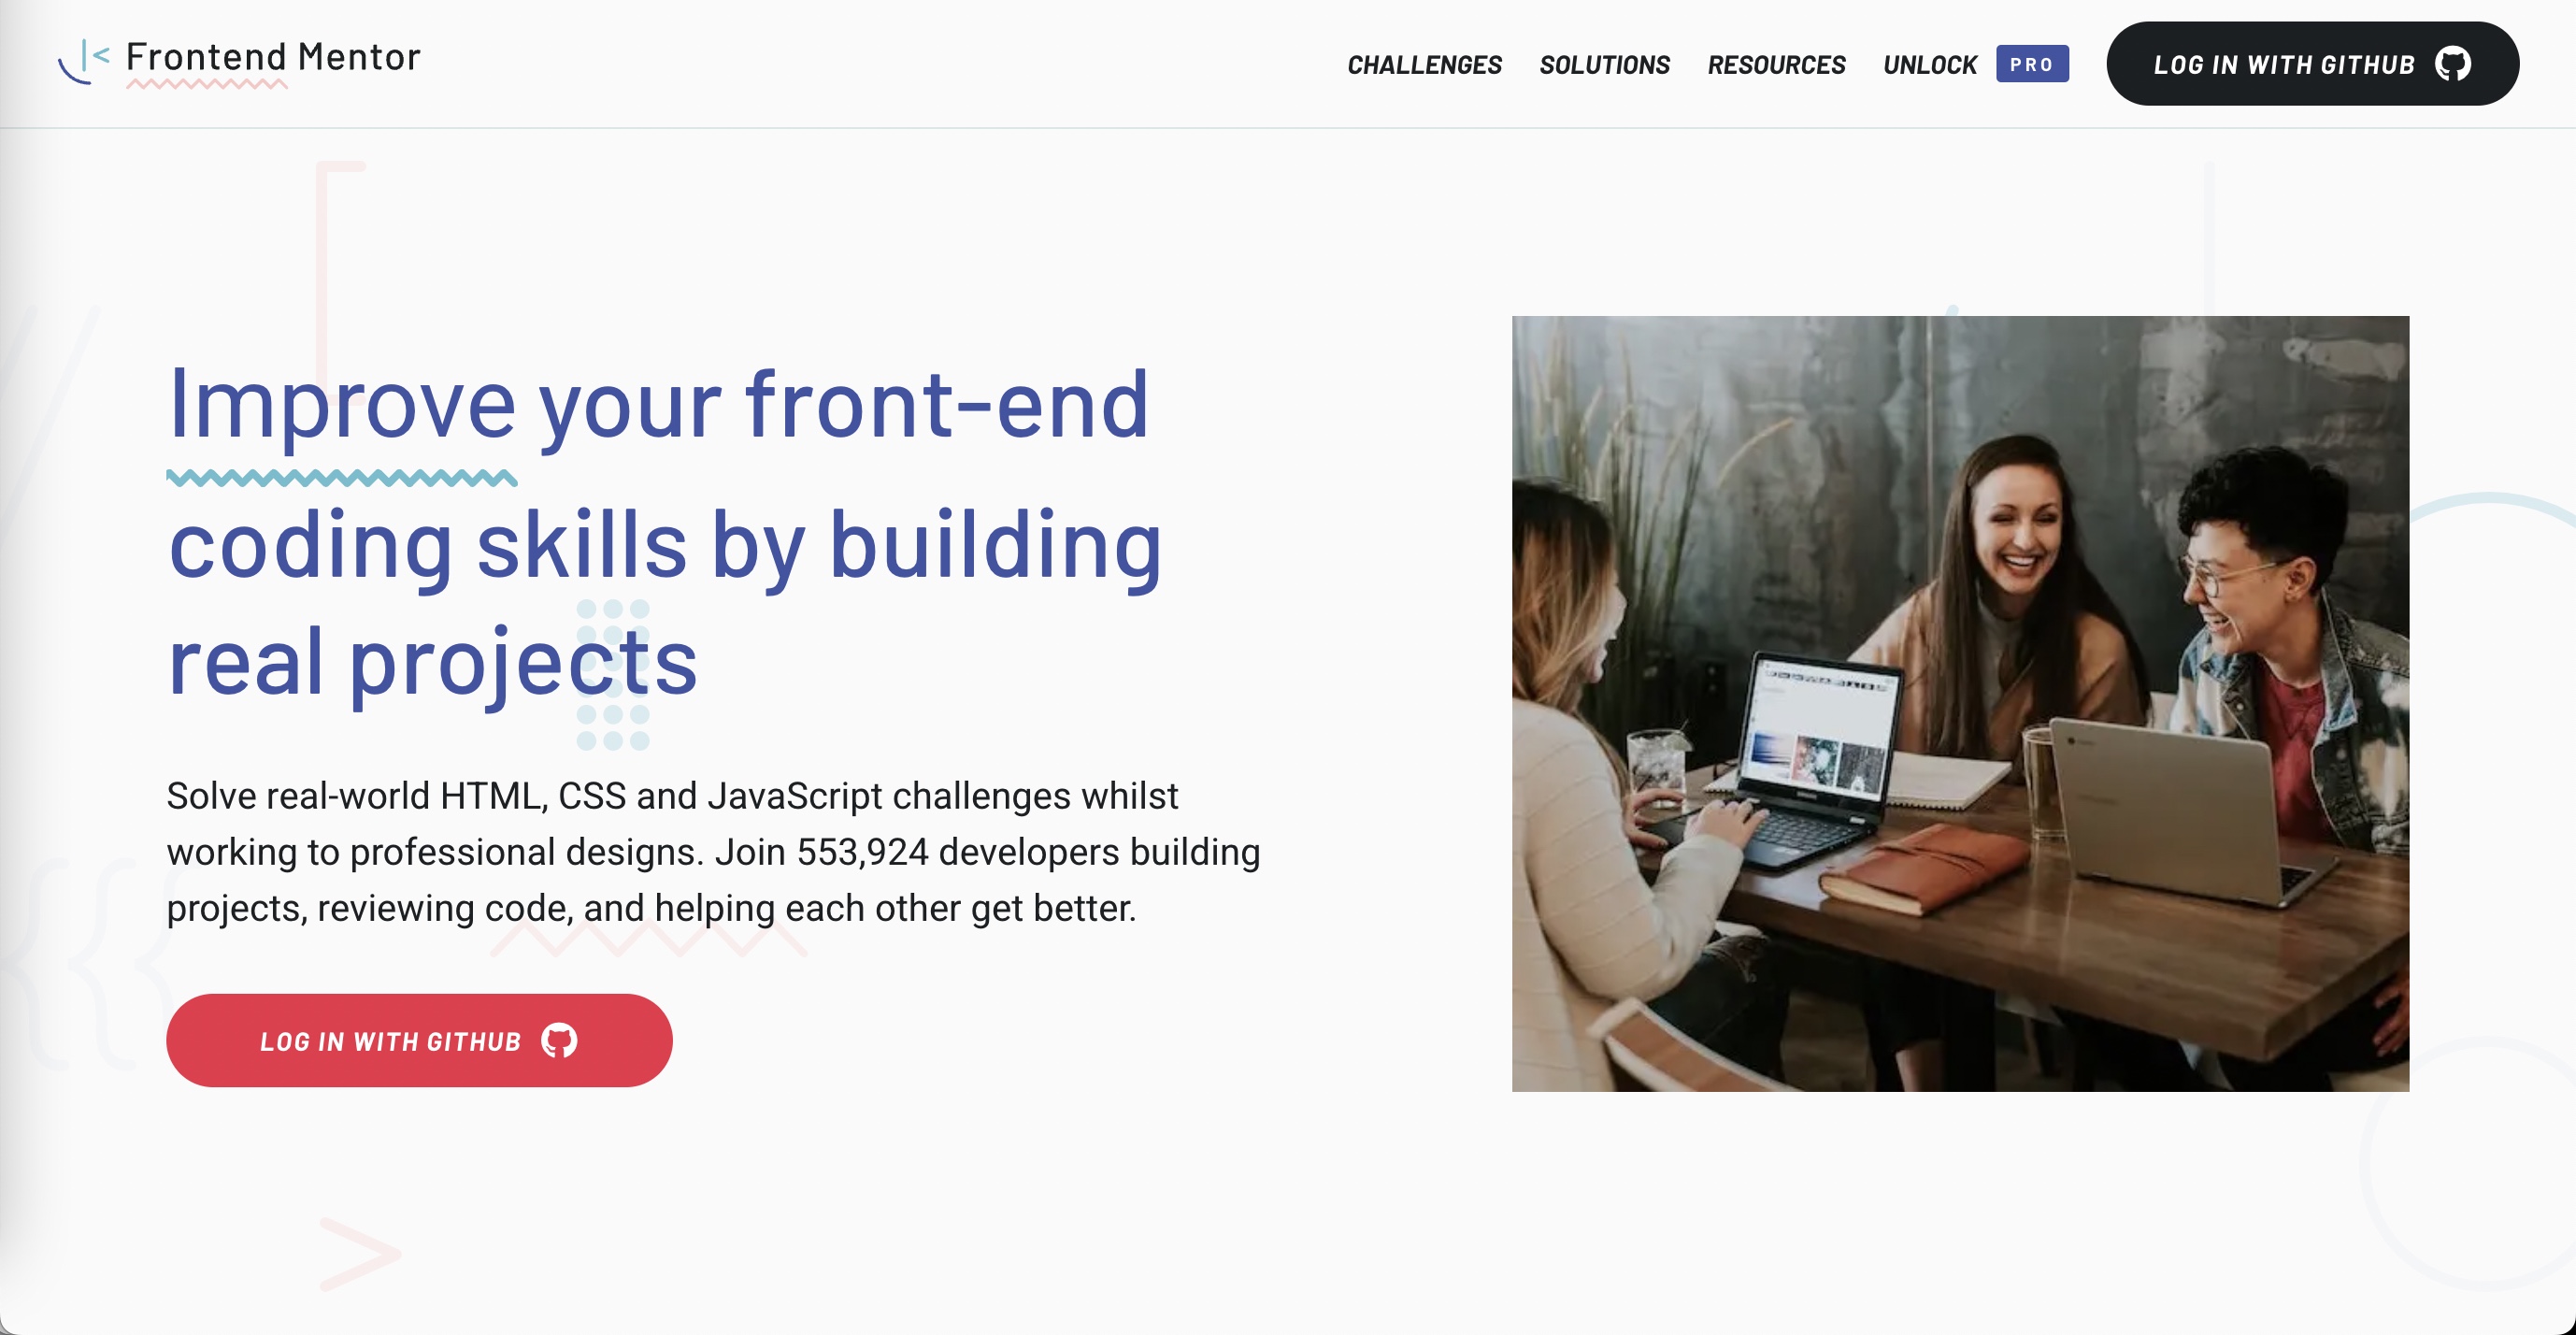 Frontend Mentor home page. Improve your front-end coding skills by building real projects